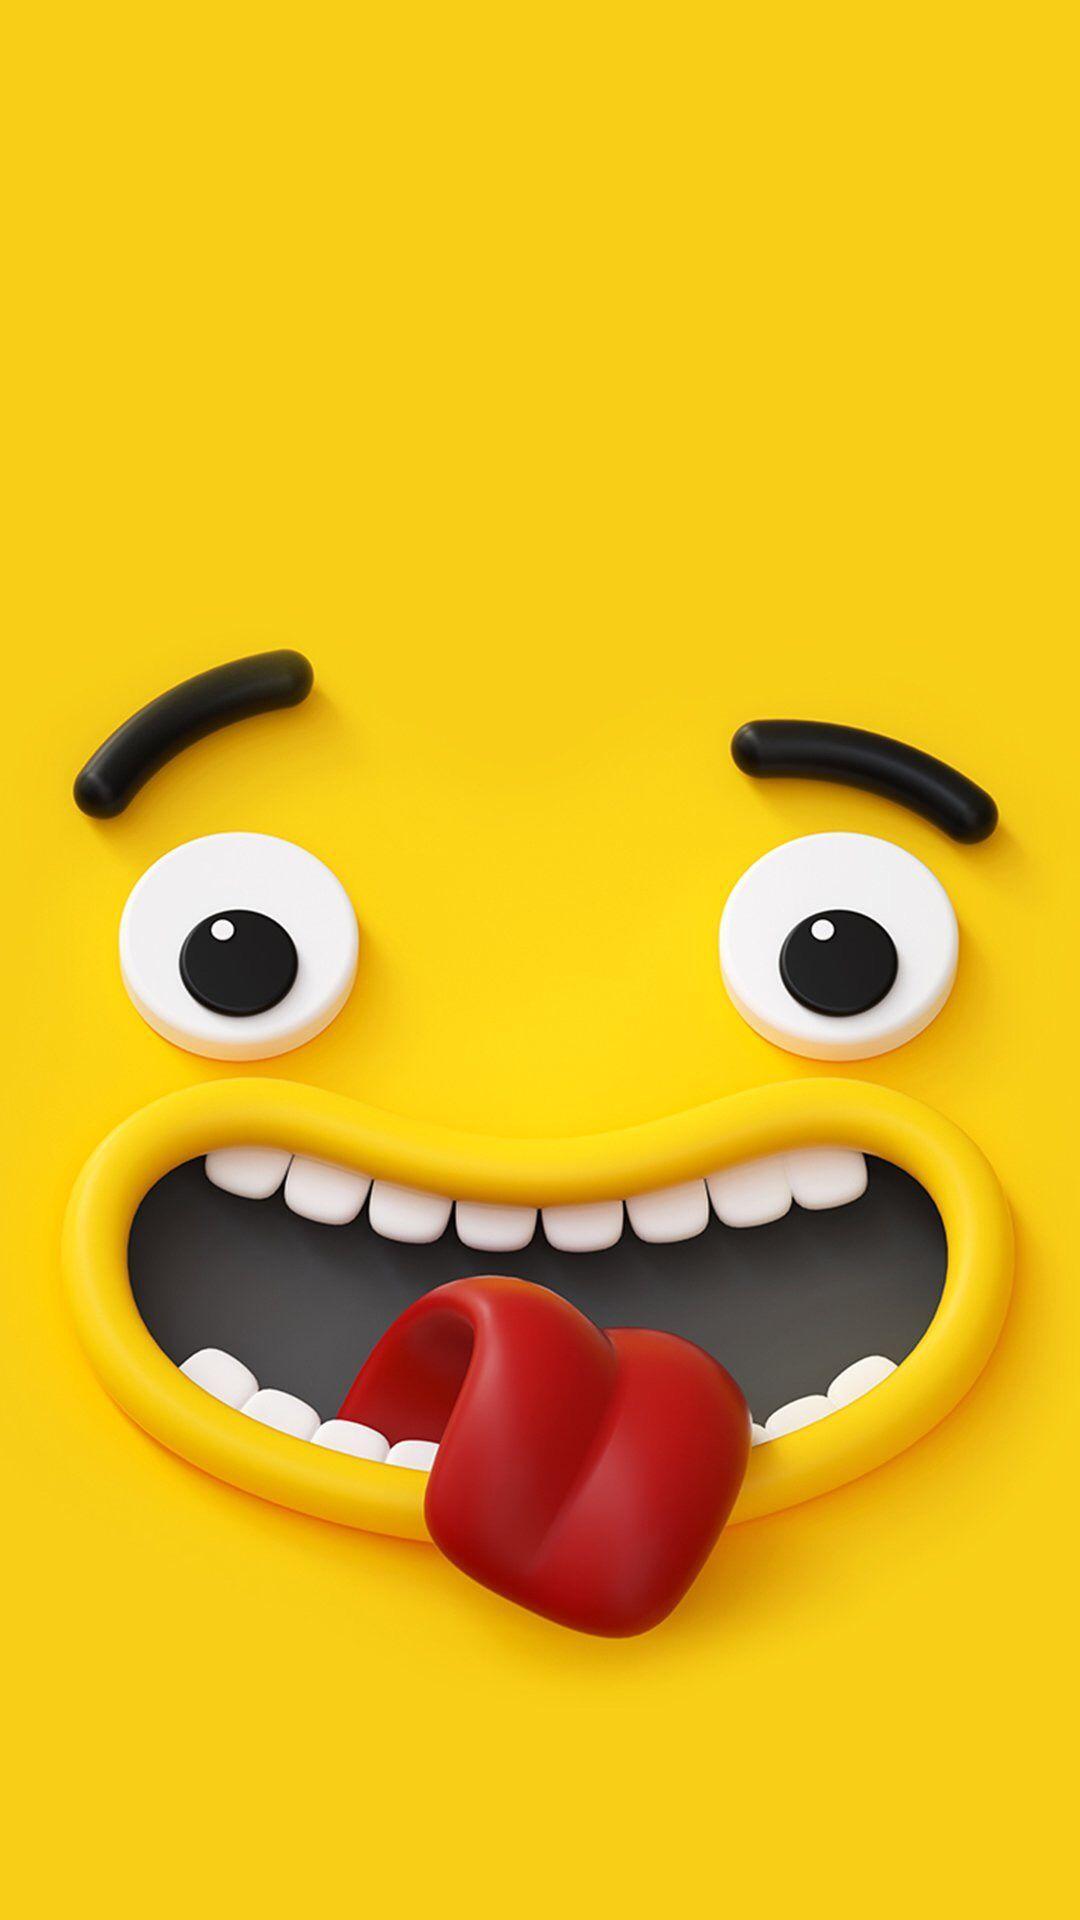 Funny Emoji Wallpapers Hd For Android Apk Download